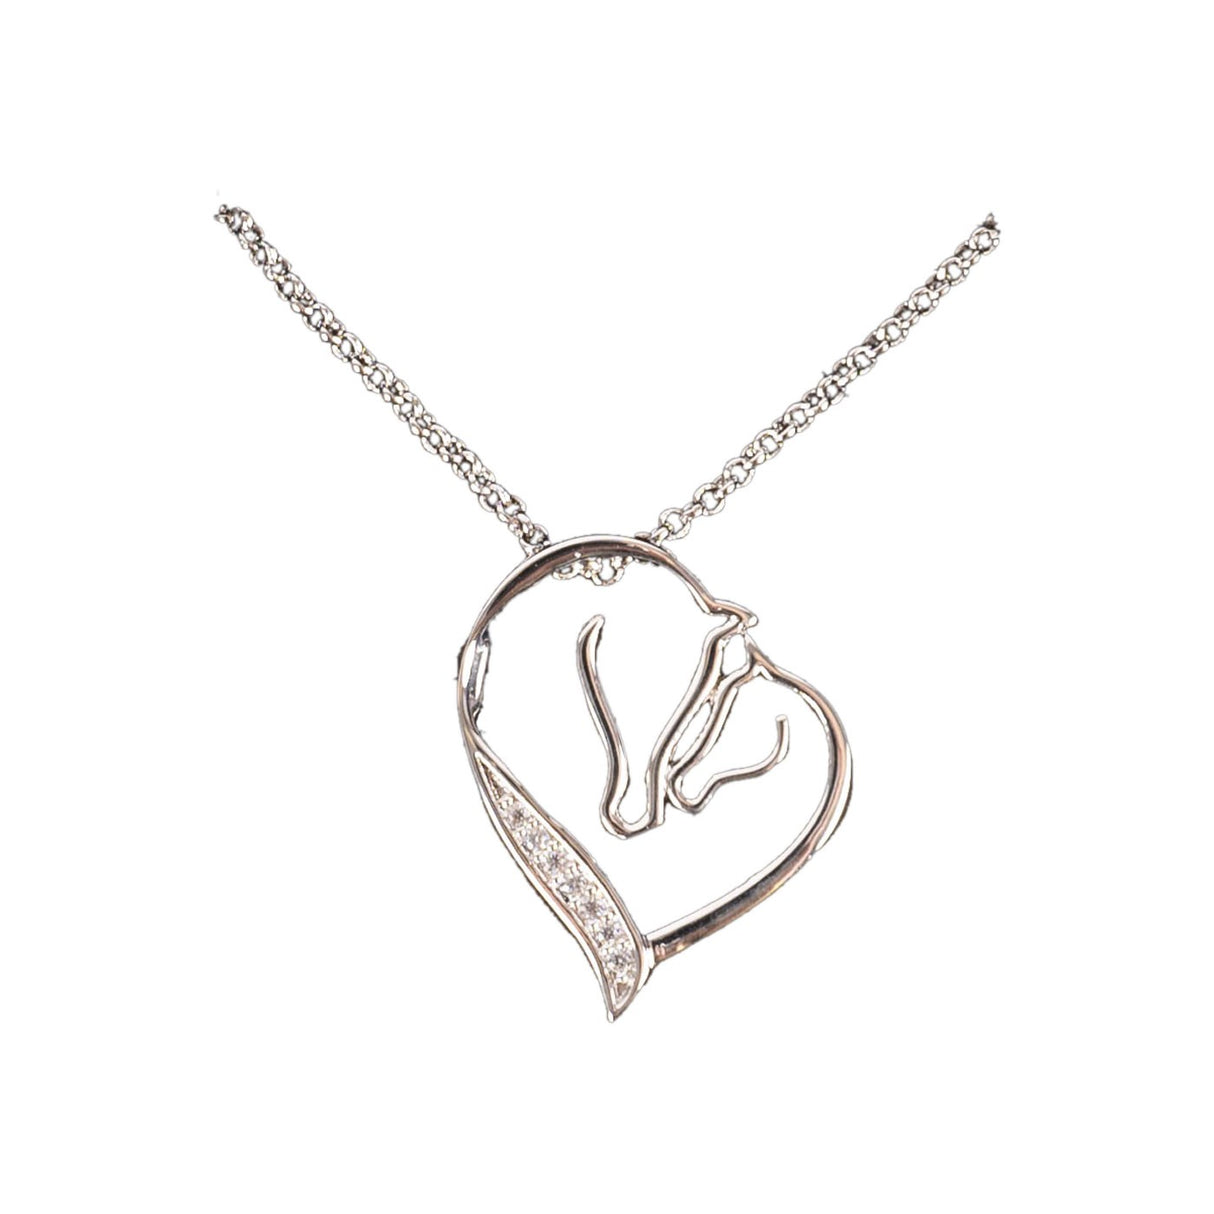 AWST Mare & Foal Necklace